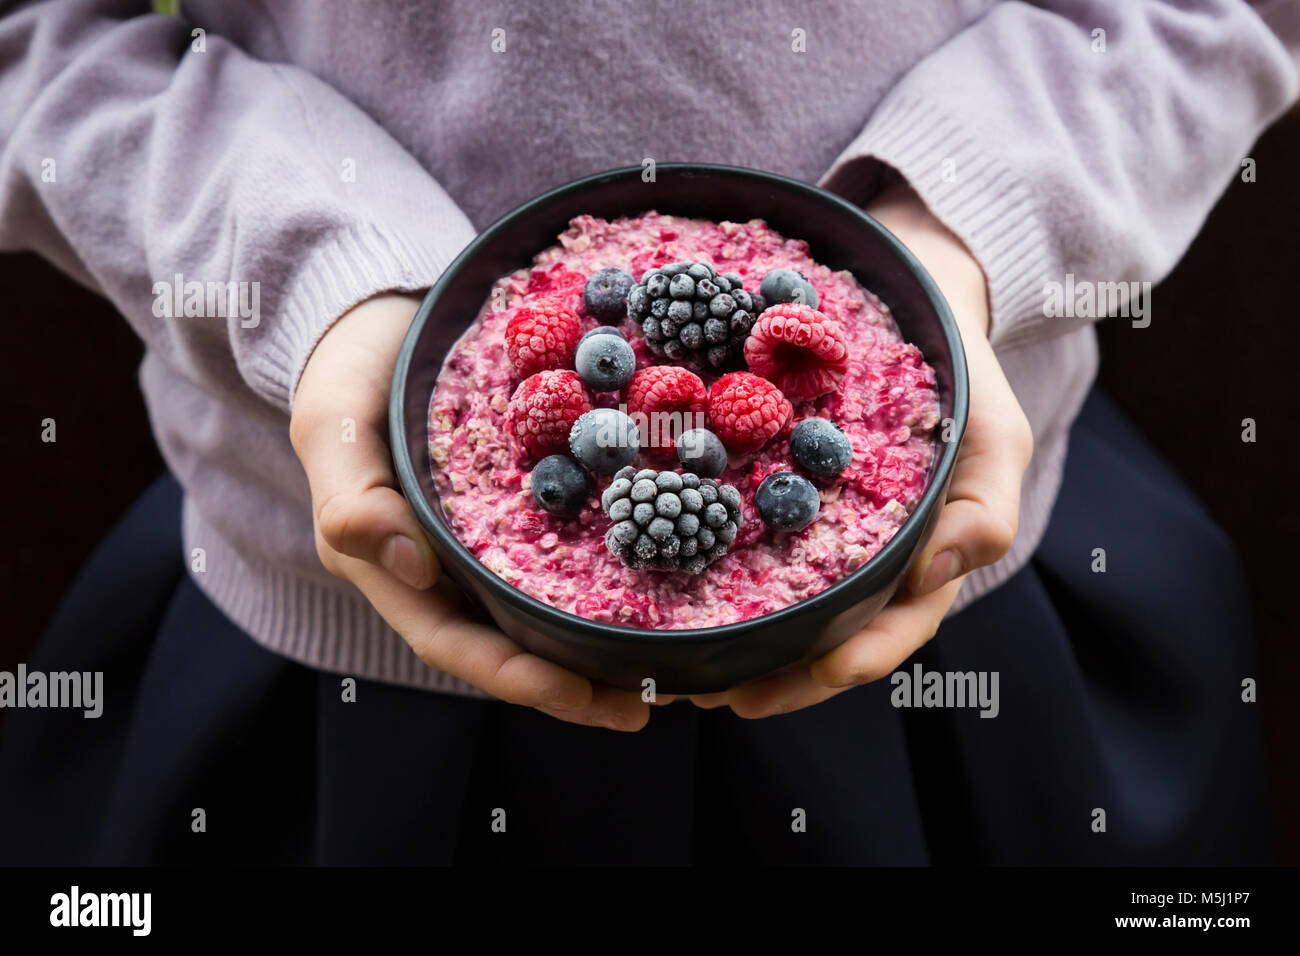 Girl holding bowl with overnight oats mit frozen berries Stock Photo